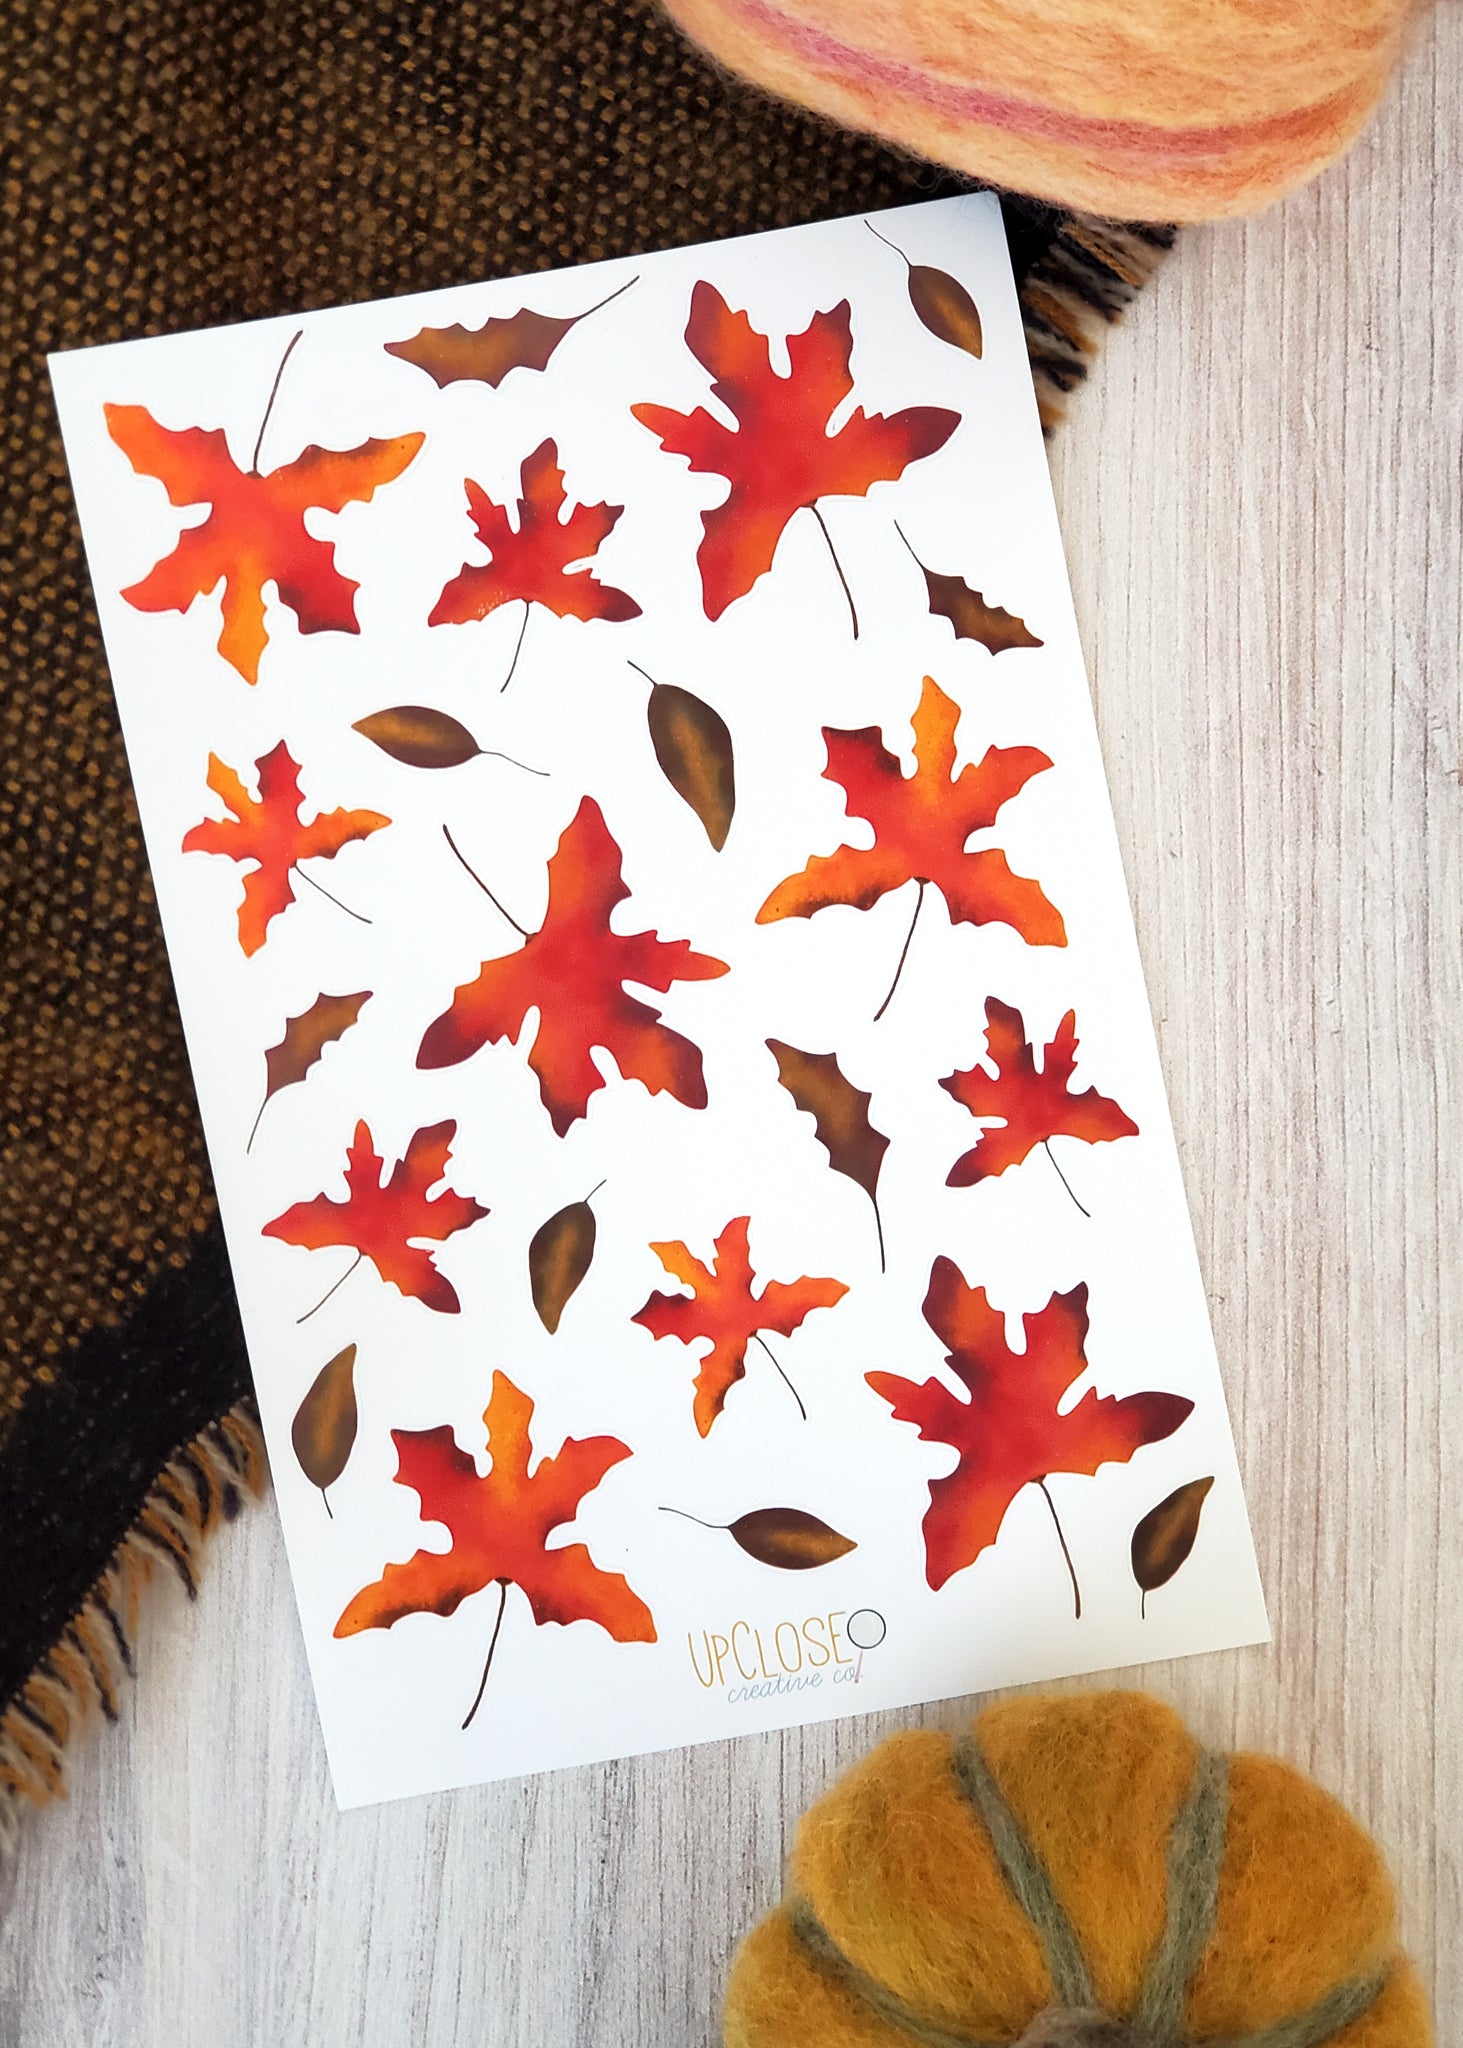 sticker sheet of illustrated fall leaves maple leaves are a mixture of red orange and yellow